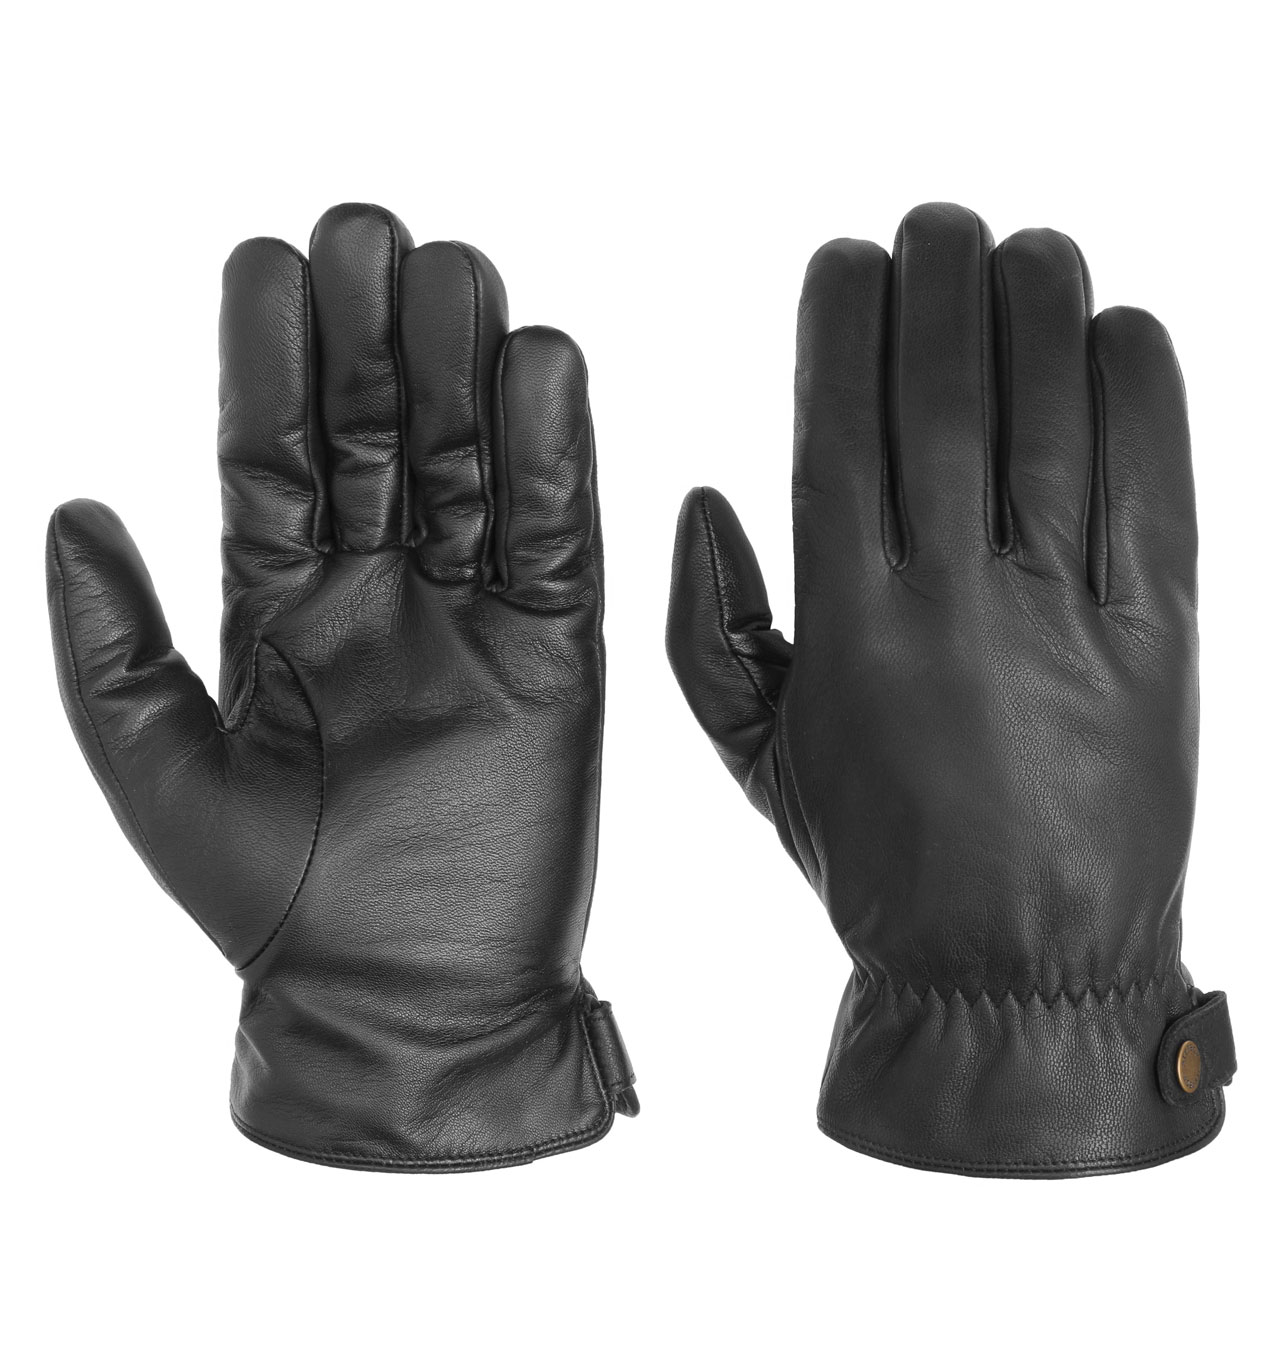 Stetson - Conductive Leather Gloves - Black